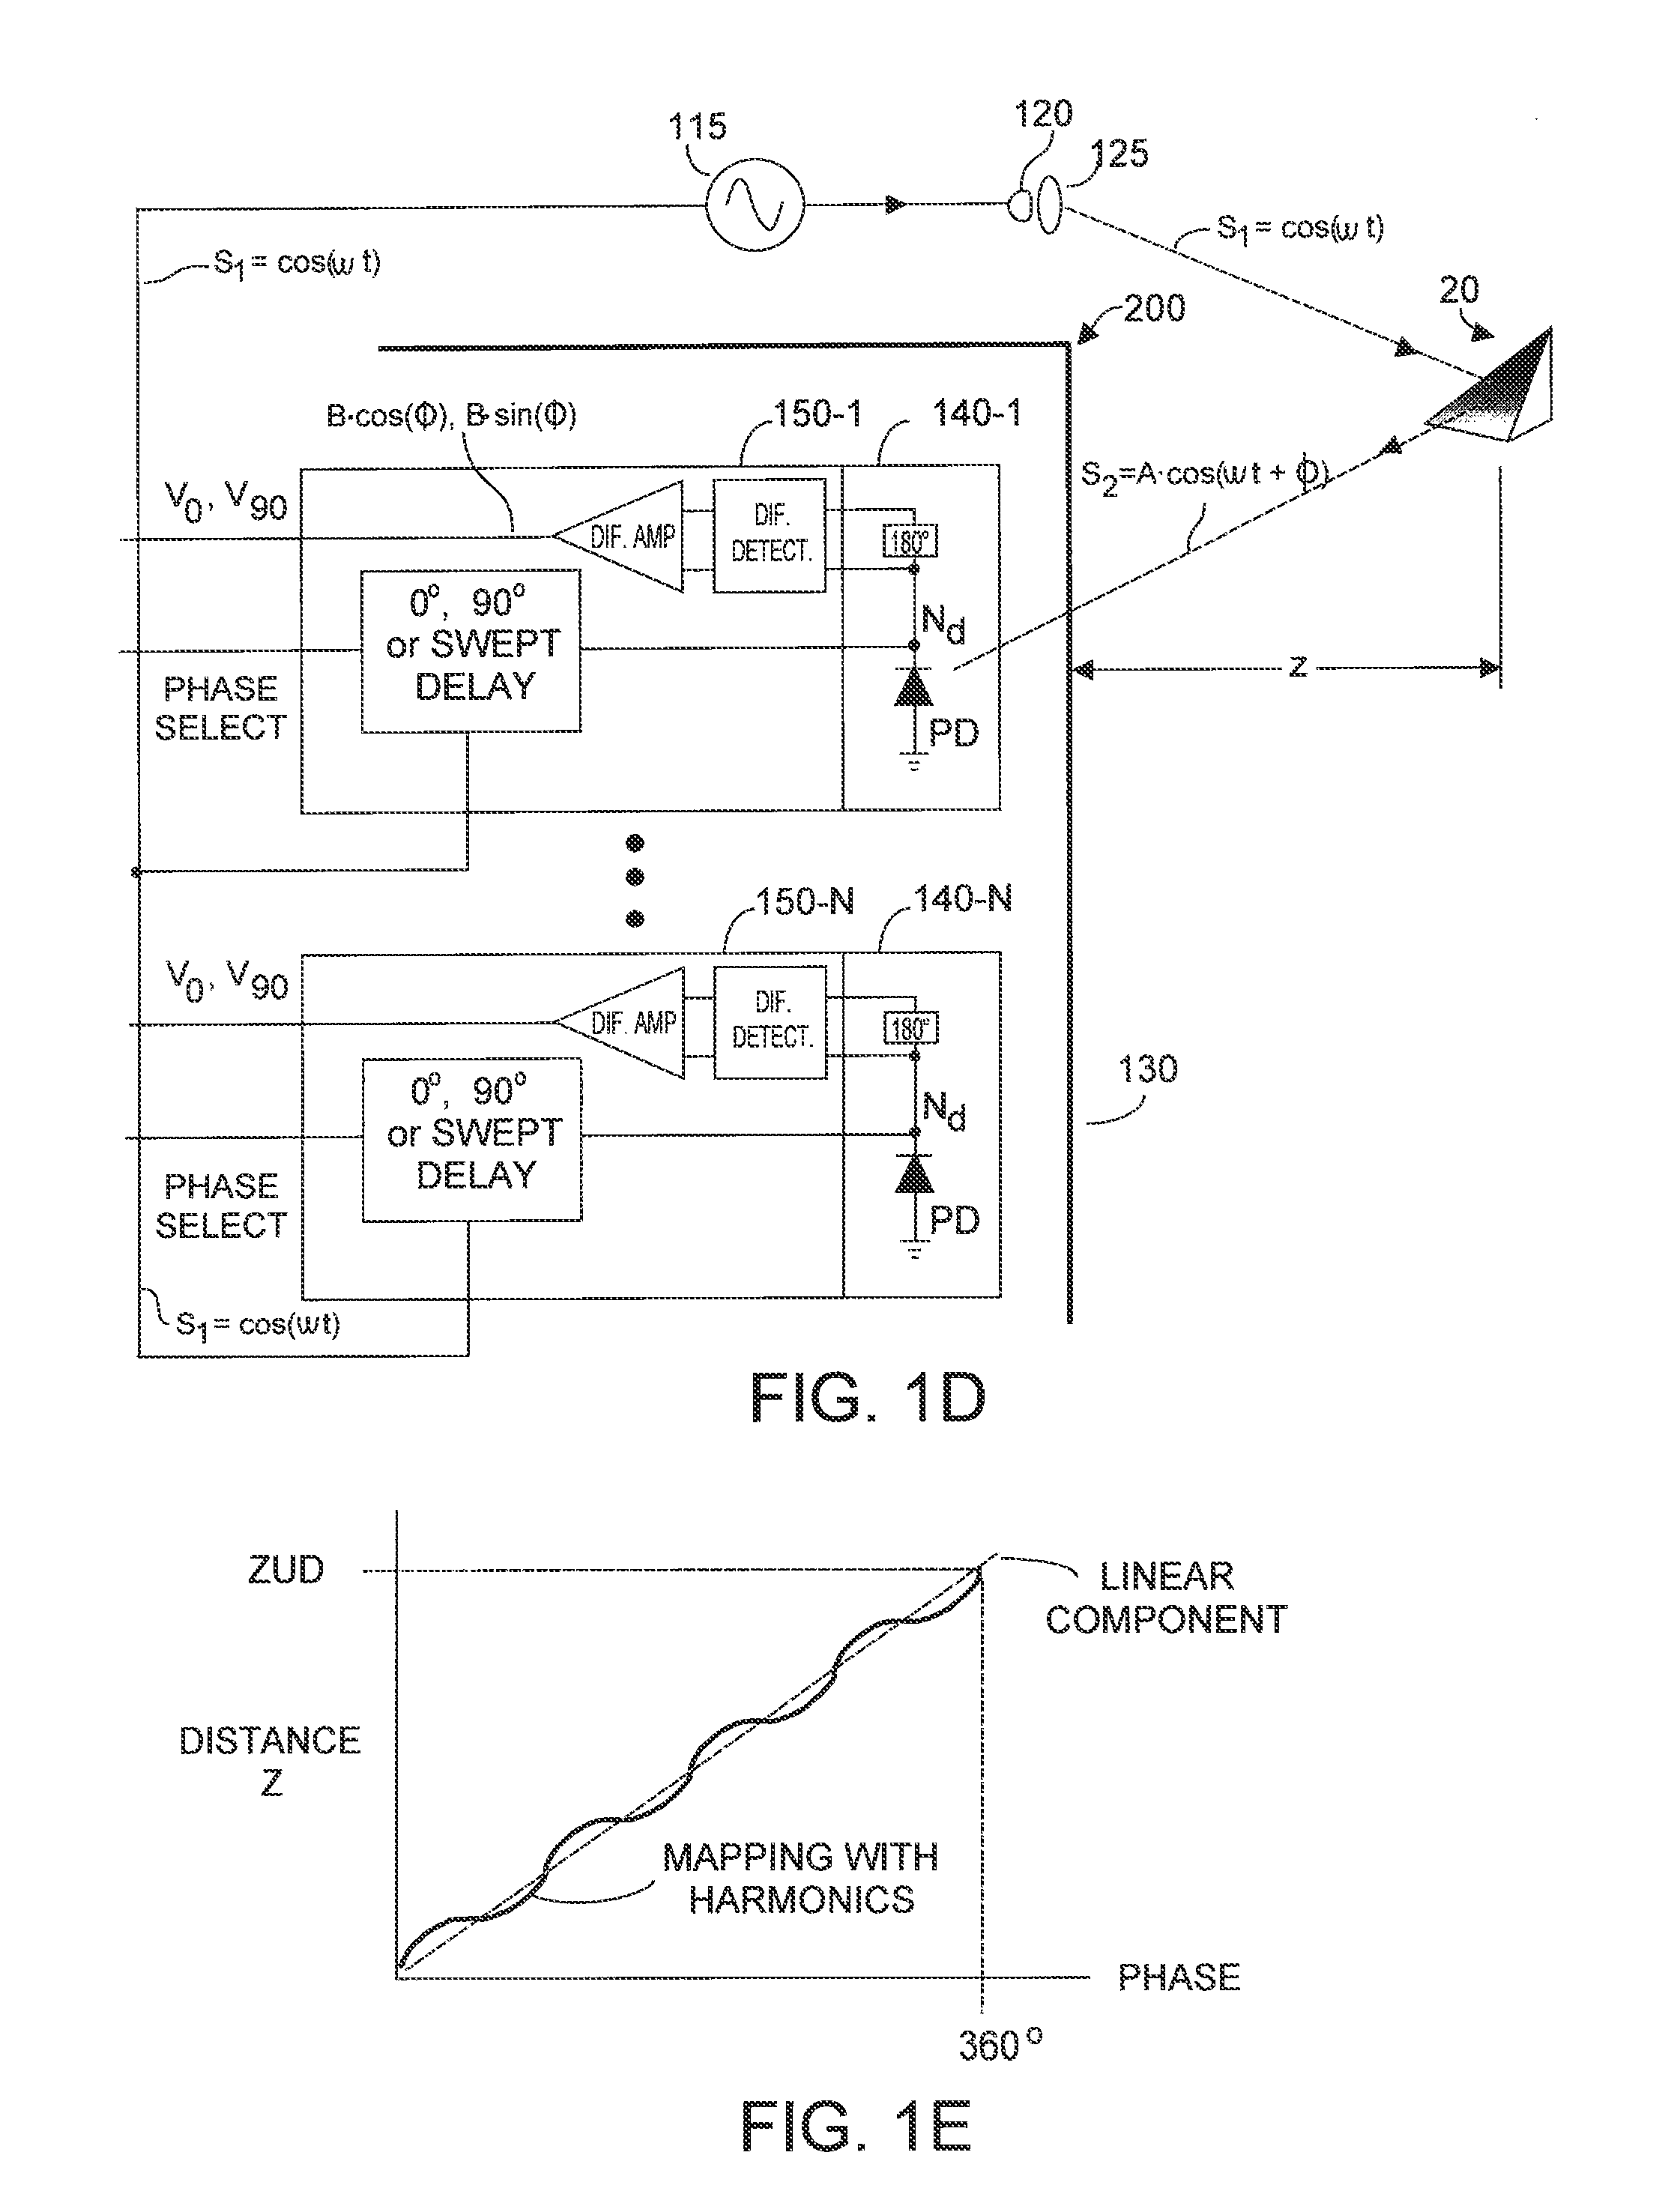 Method and system for multi-phase dynamic calibration of three-dimensional (3D) sensors in a time-of-flight system